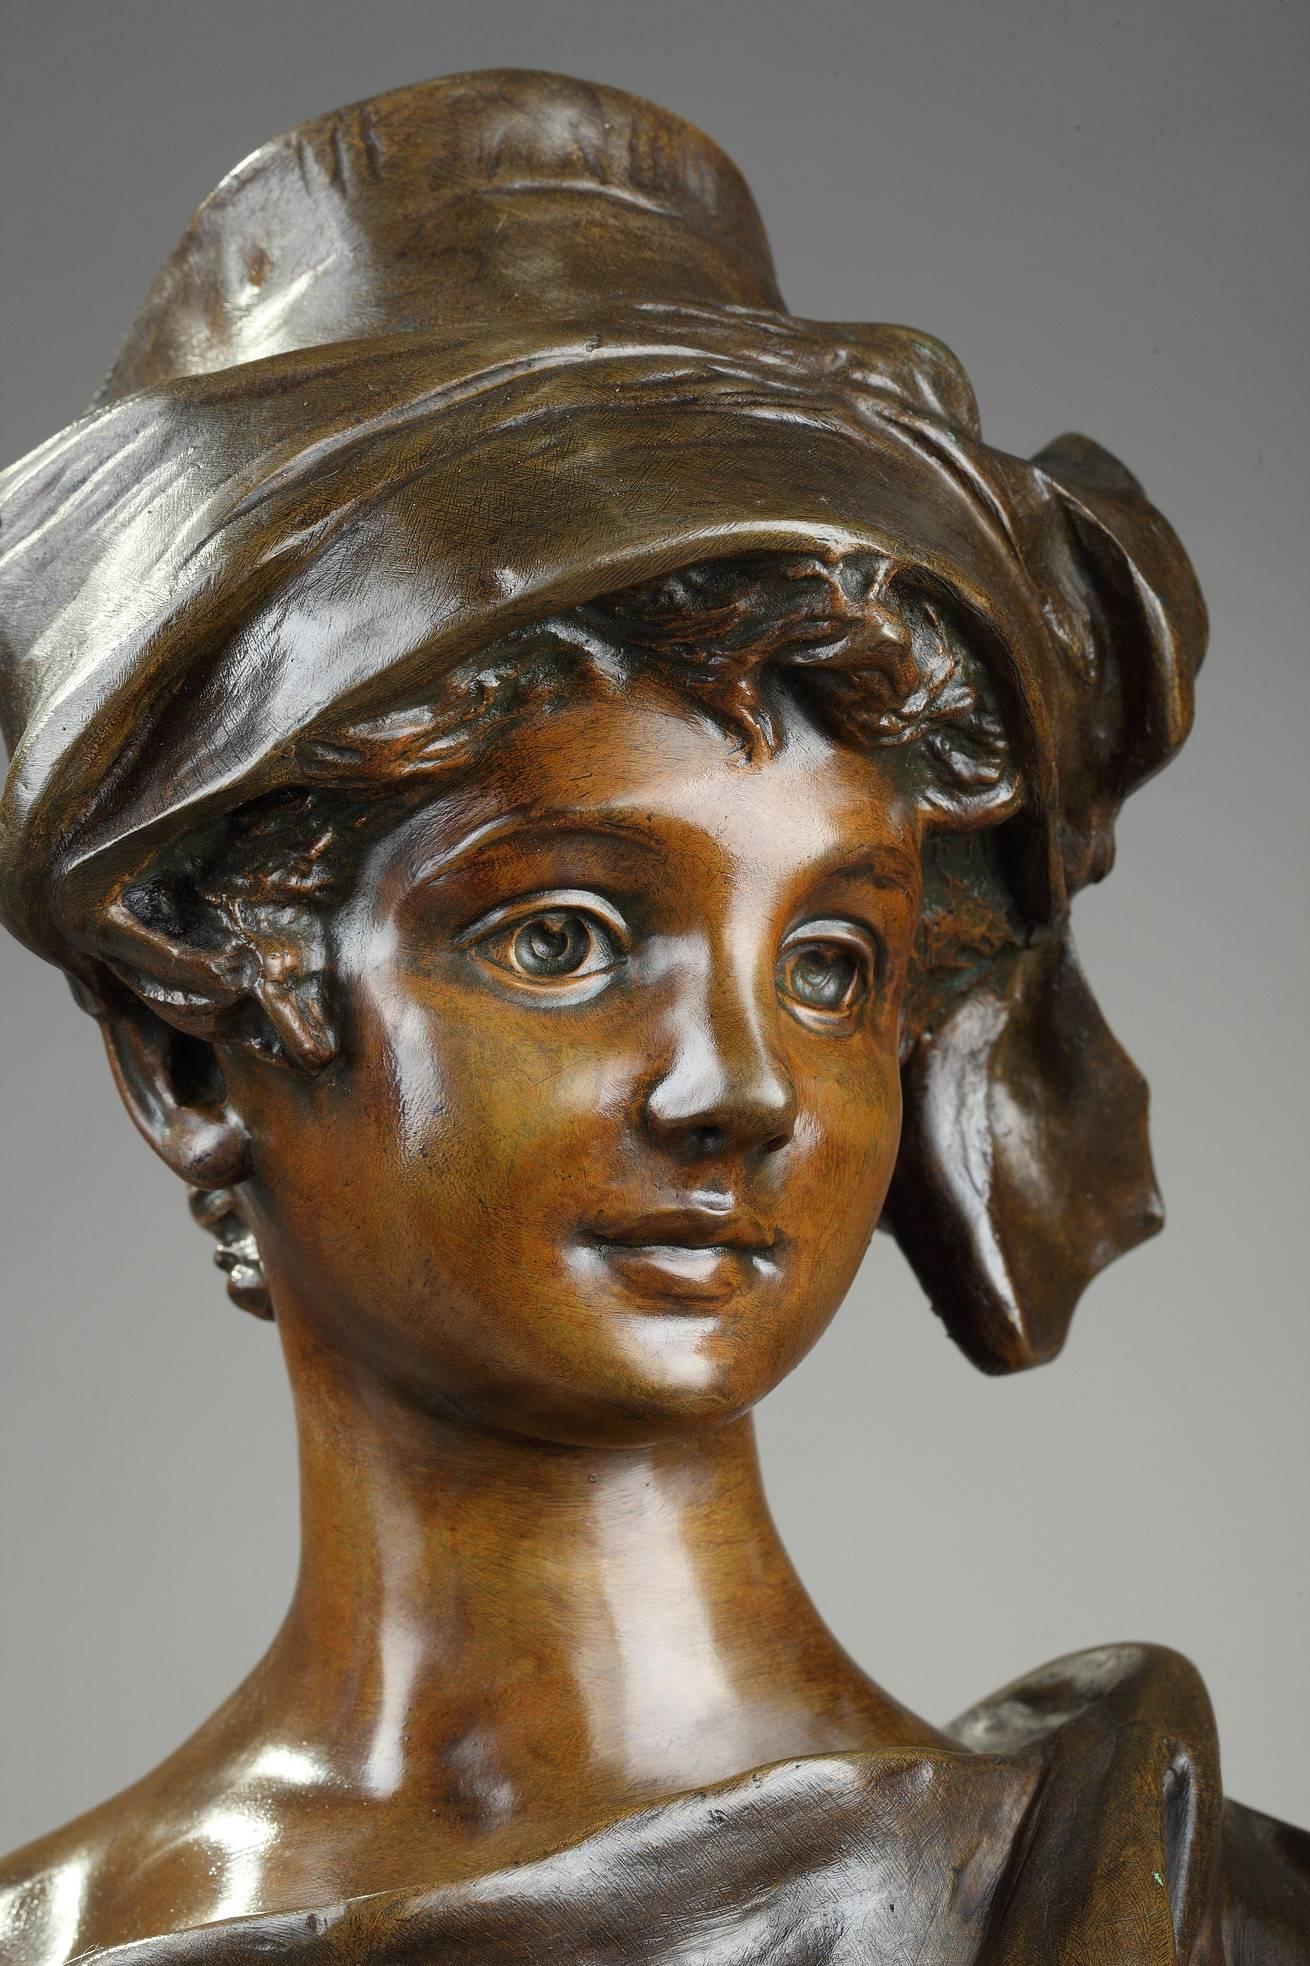 Late 19th century patinated bronze sculpture featuring the bust of a smiling woman by the Belgian sculptor Georges Van der Straeten (1856-1928). She is wearing an elegant hat decorated with ribbon. Signed in the back: van der Straeten. Foundry mark: